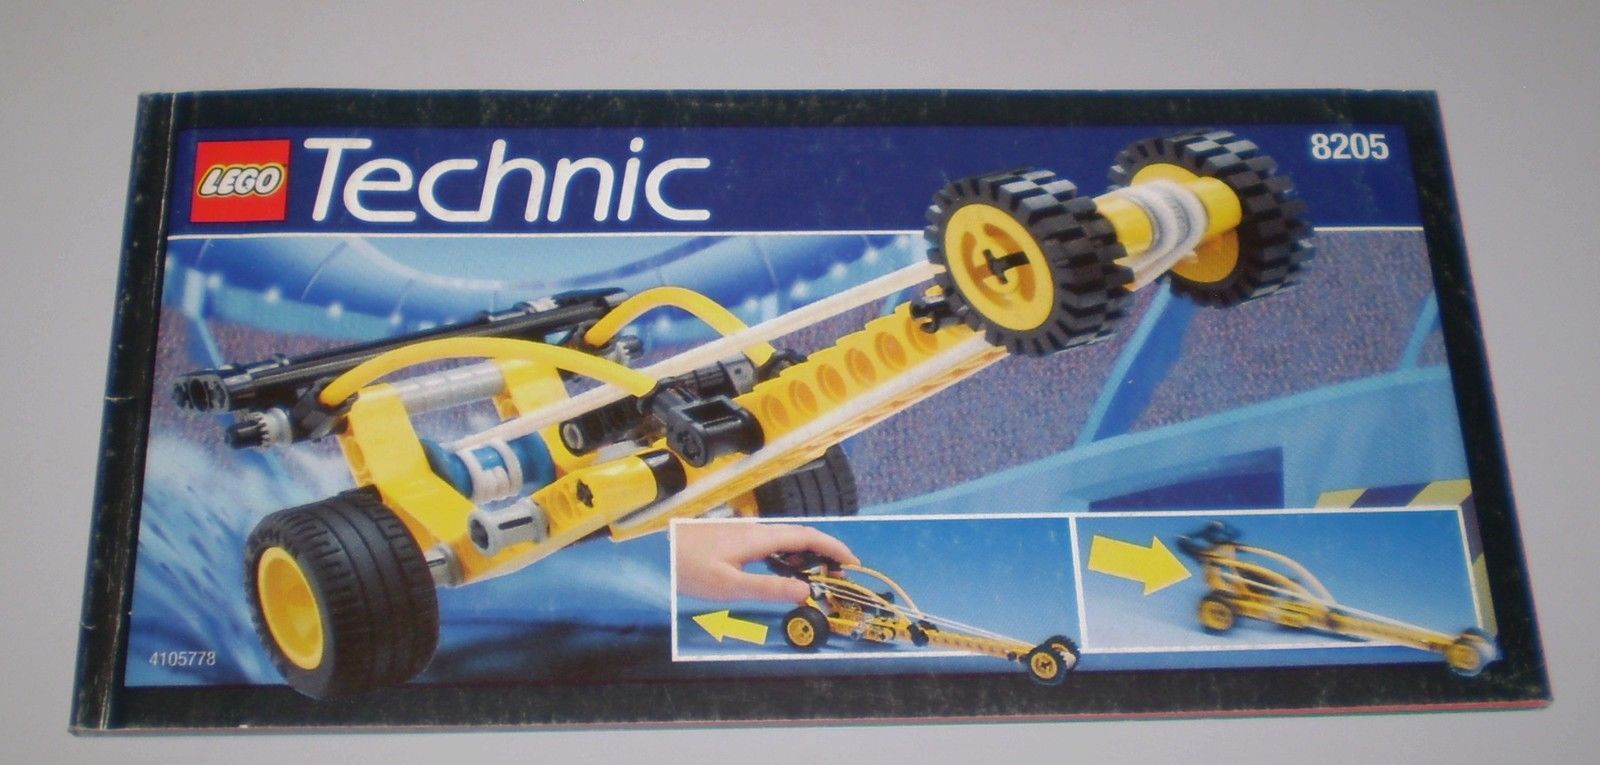 Primary image for Used Lego Technic INSTRUCTION BOOK ONLY # 8205 Bungee Blaster No Legos included